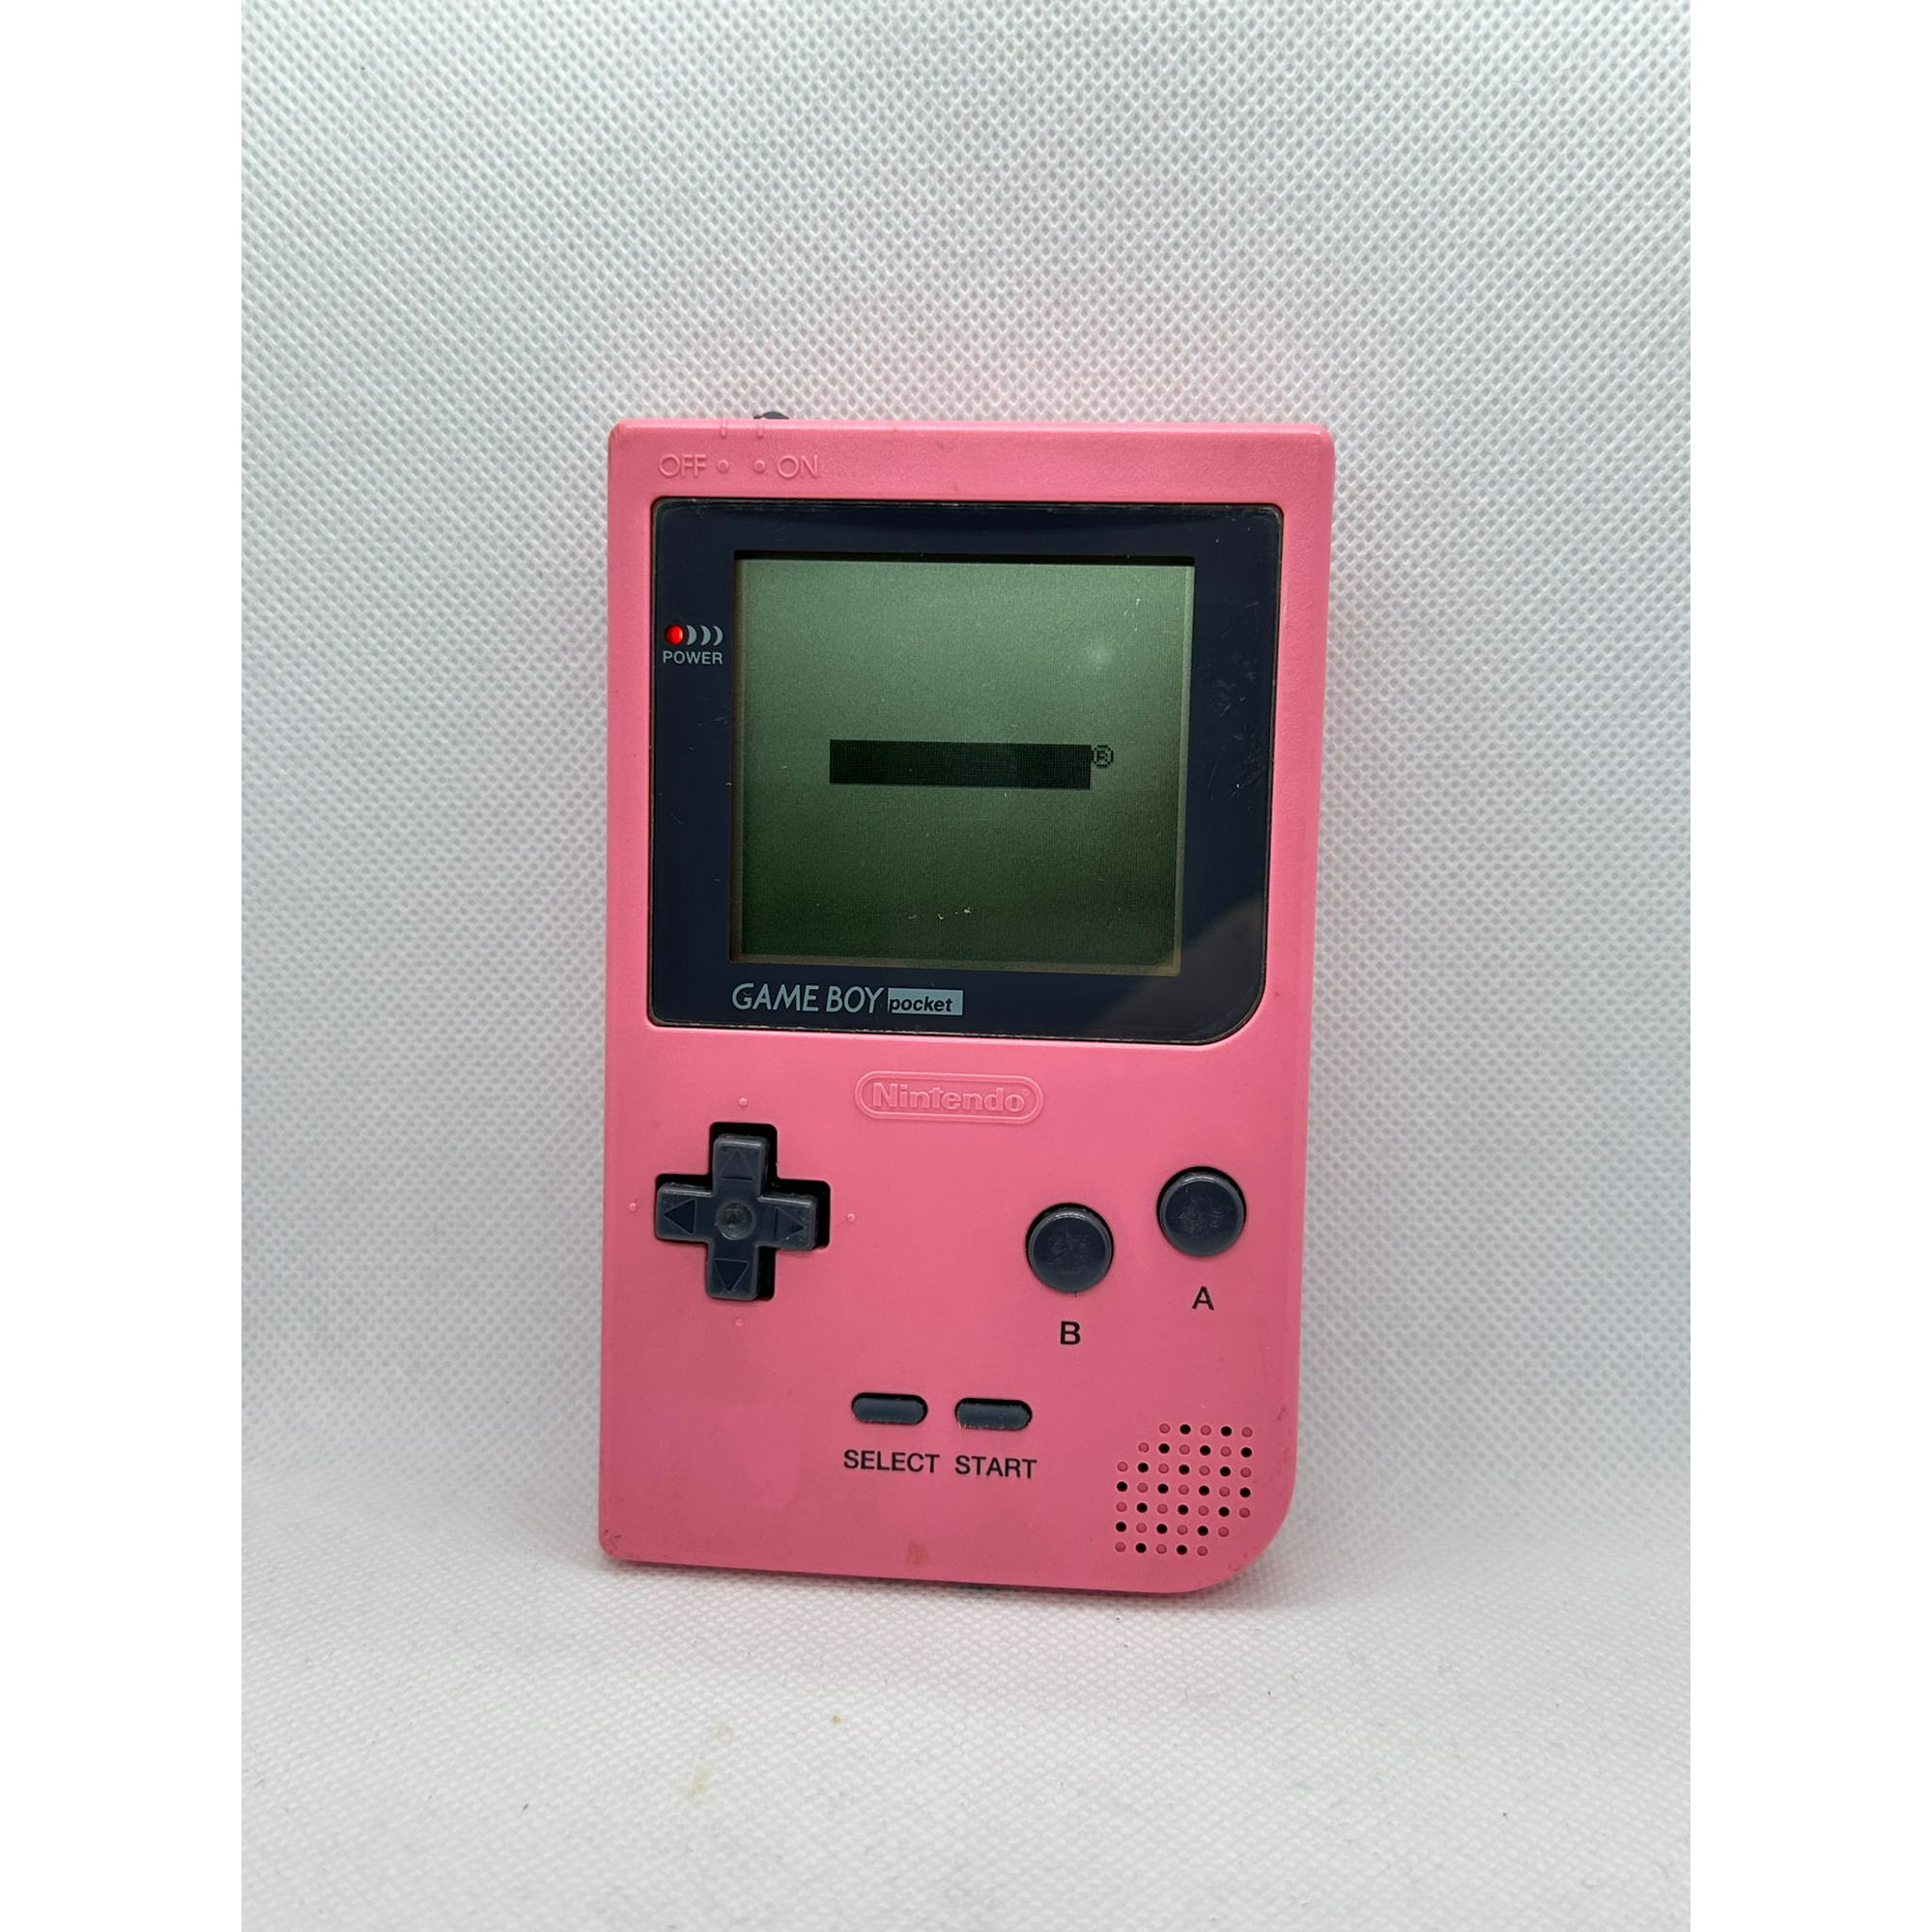 Authentic Nintendo GameBoy Pocket Pink, Game Boy Console MGB-001 Tested  %100 OEM Works Great, Rare Collectable Pre-Owned